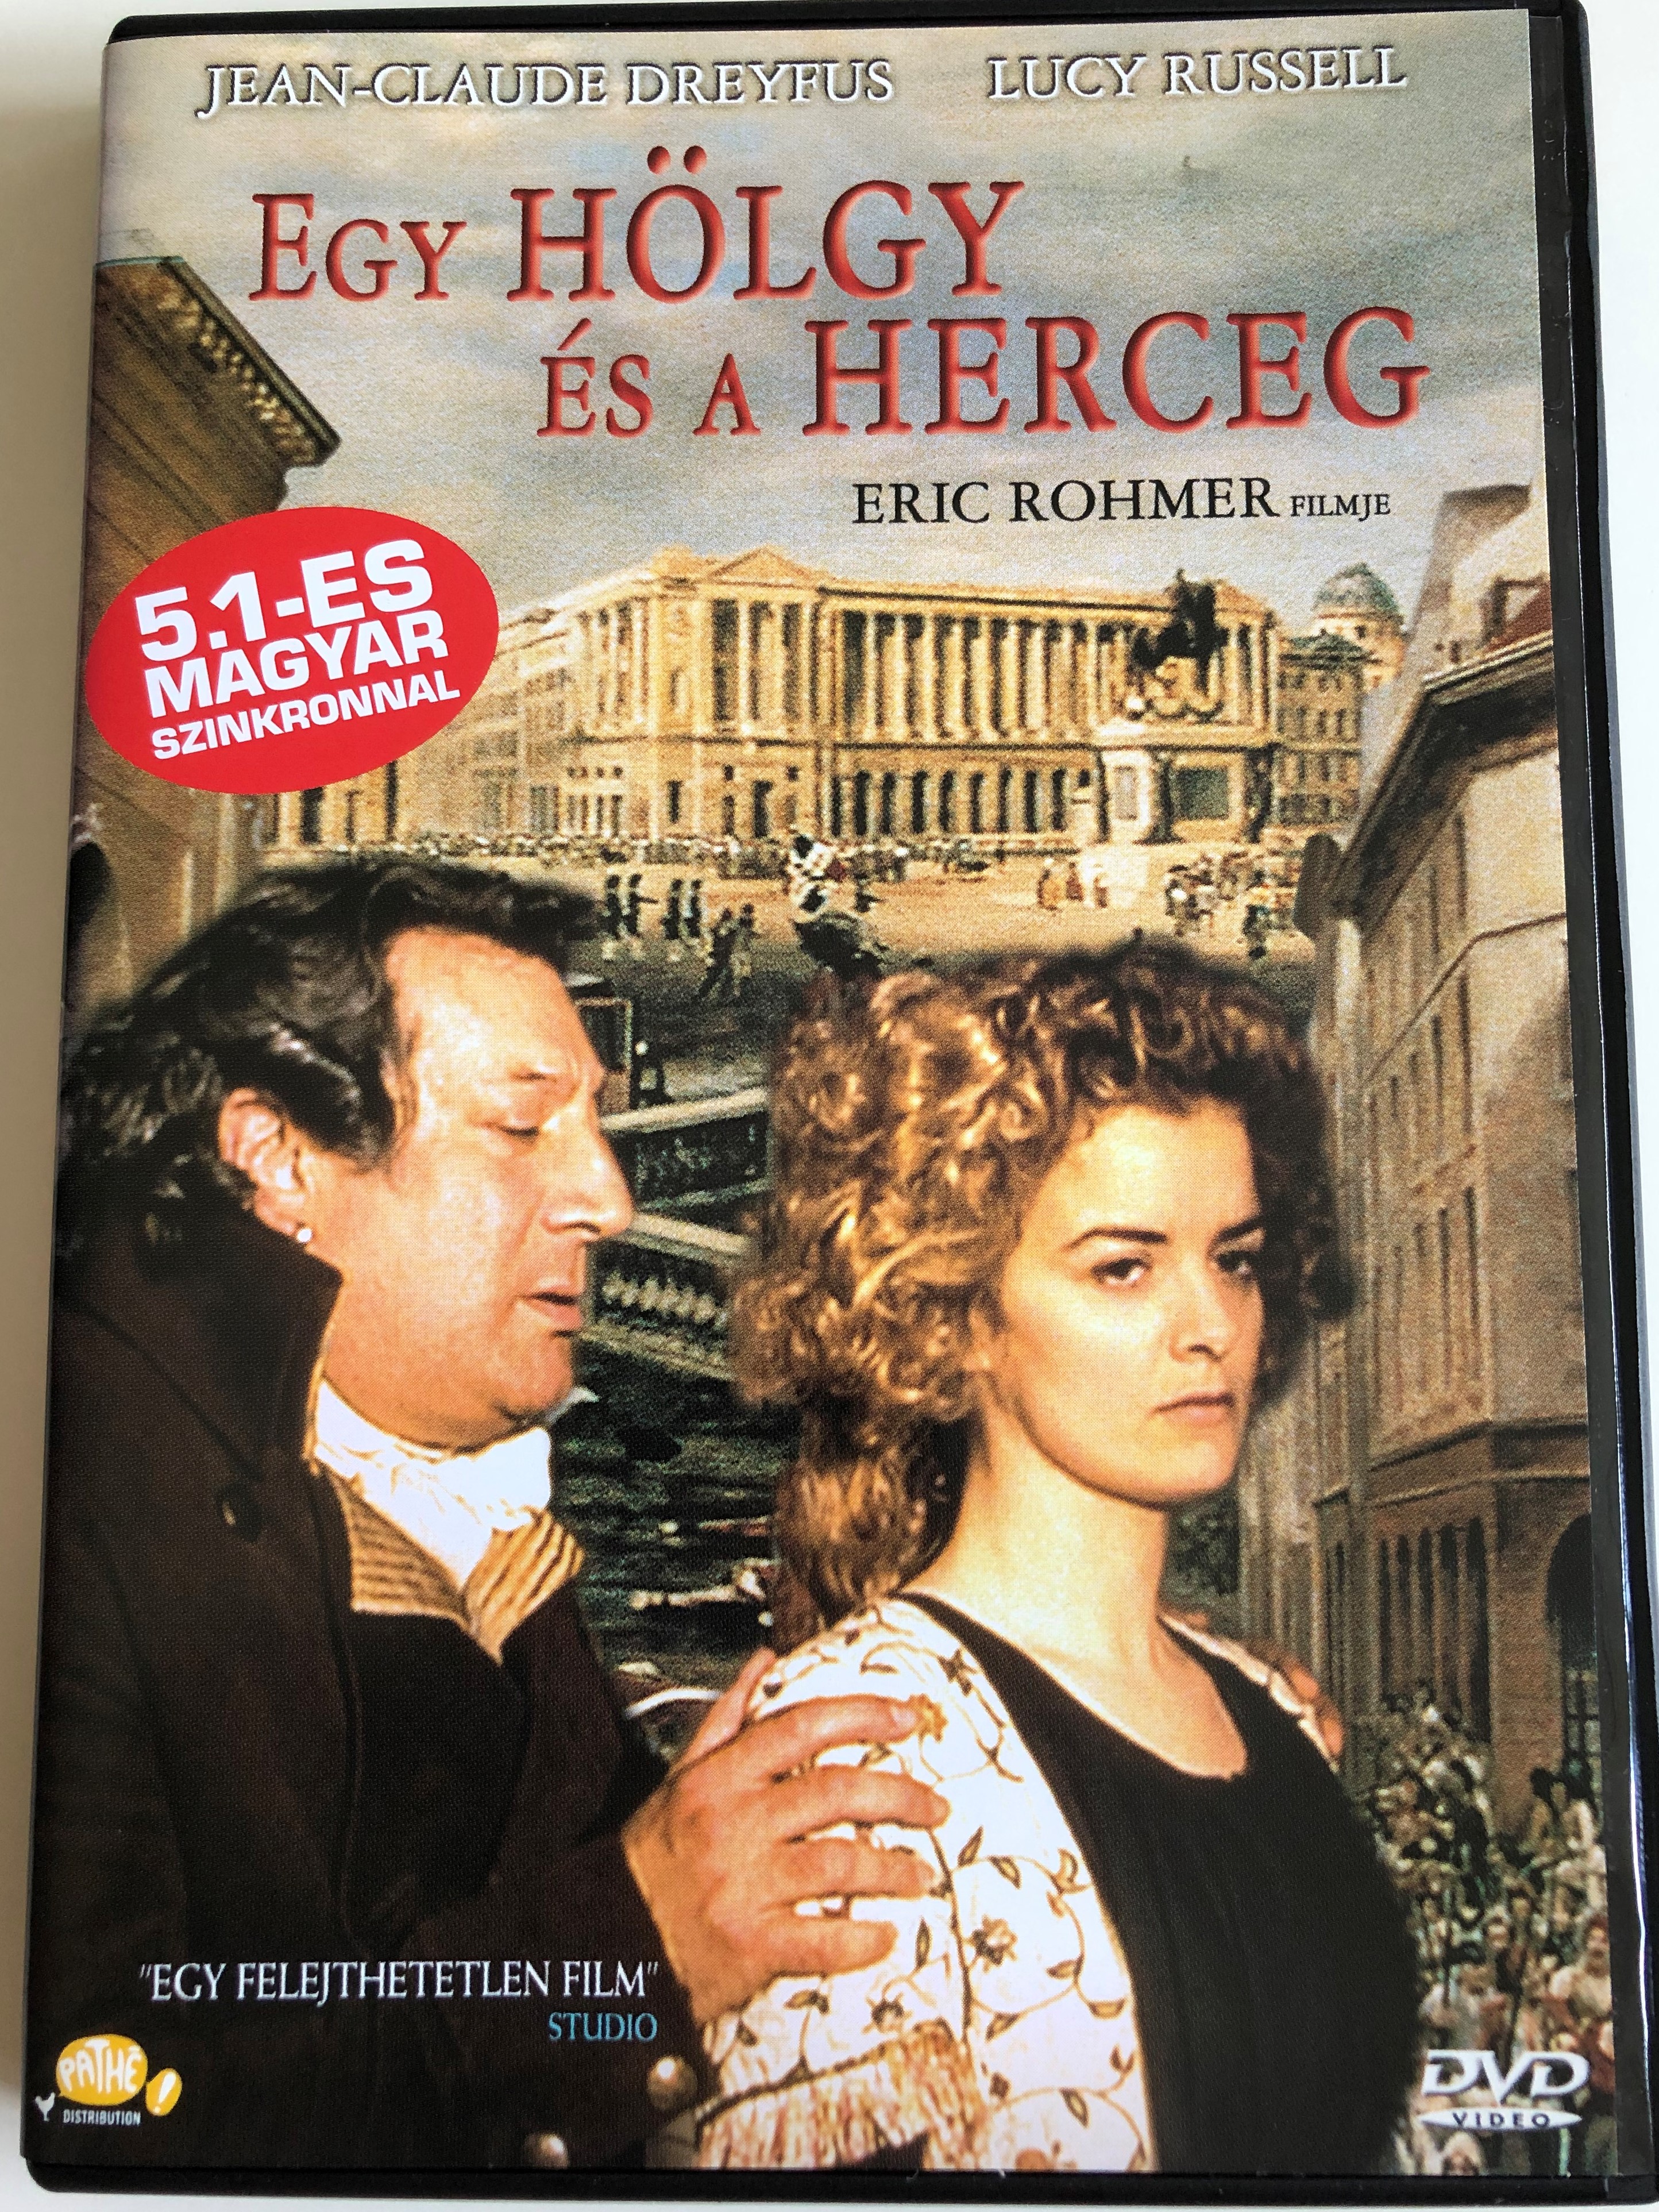 l-anglaise-et-le-duc-dvd-2001-egy-h-lgy-s-a-herceg-directed-by-eric-rohmer-starring-jean-claude-dreyfus-lucy-russell-5.1-hungarian-audio-1-.jpg